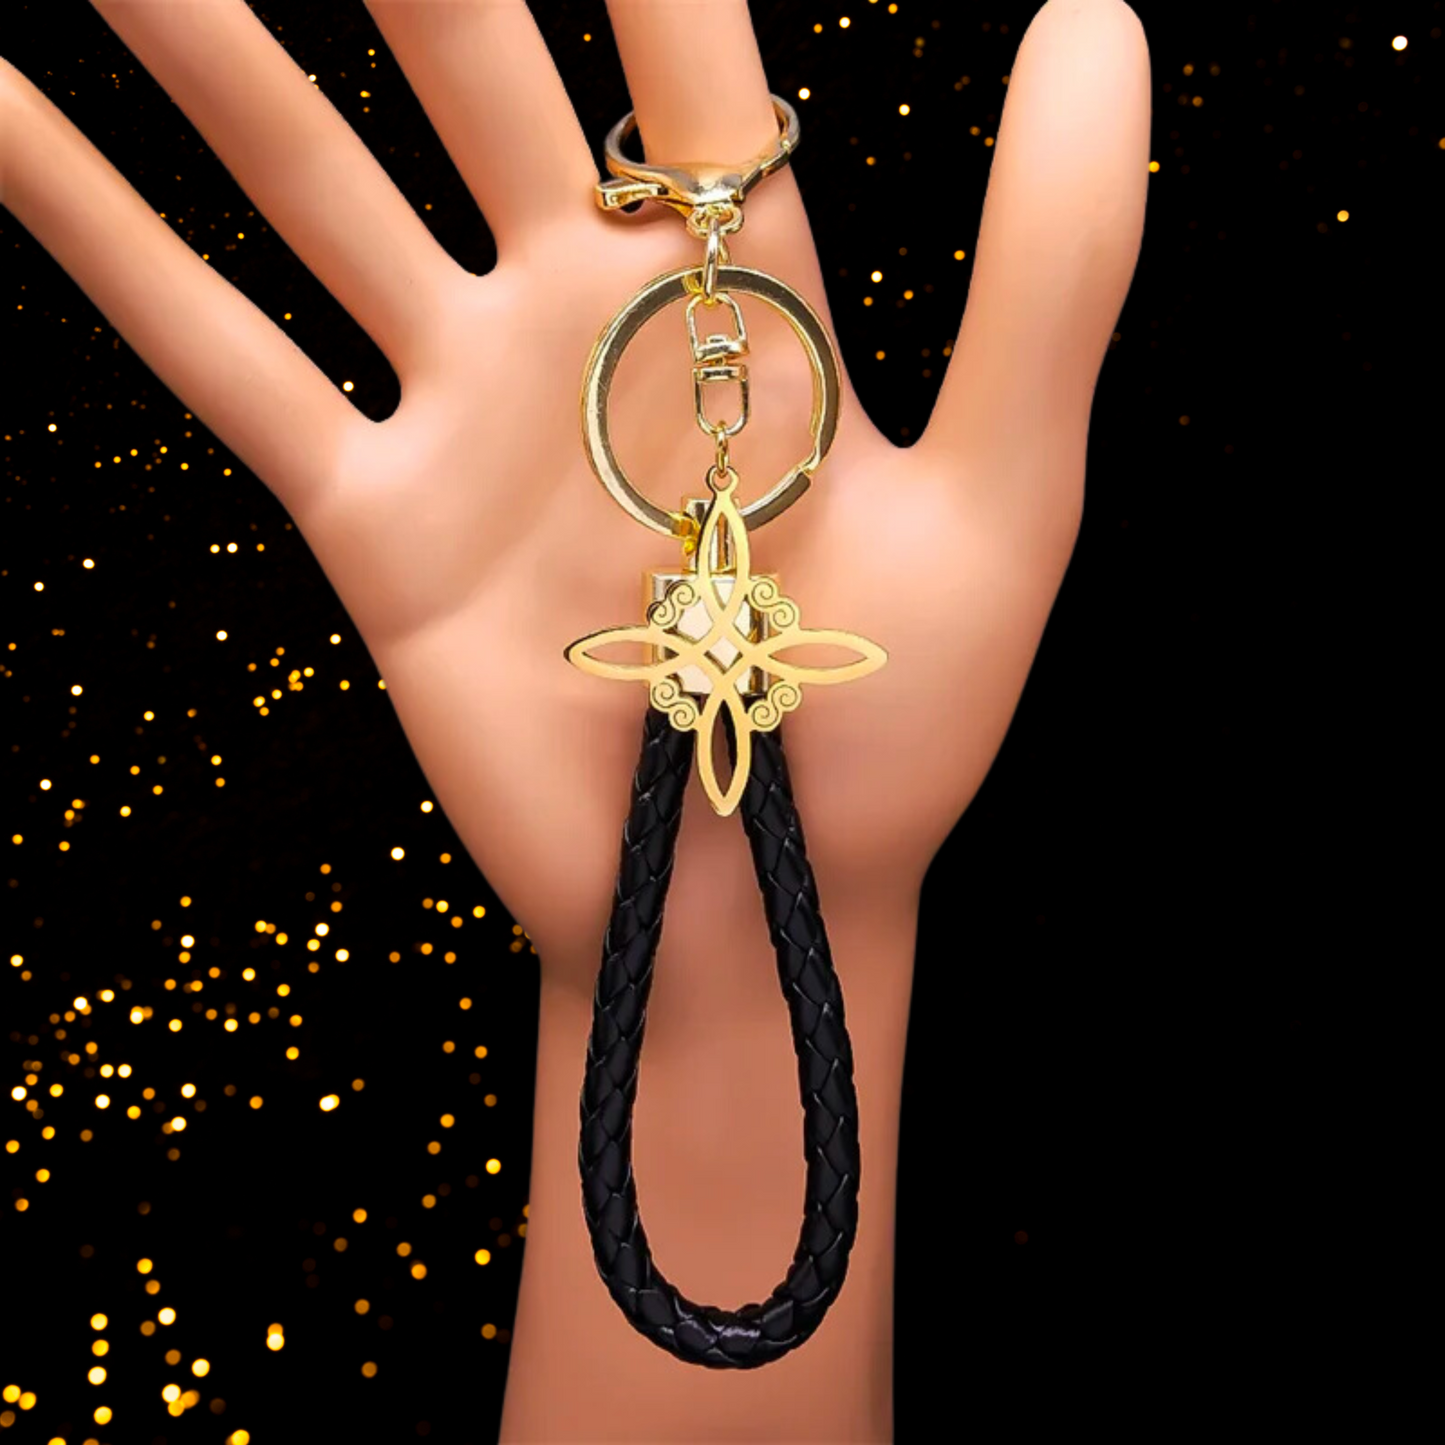 Witchcraft Irish Knot Keychain • Gold Color Triquetra Stainless Steel Vegan Leather Keyring Holder • Witchy Amulet Jewelry Spiritual Gift • Apollo Tarot Shop